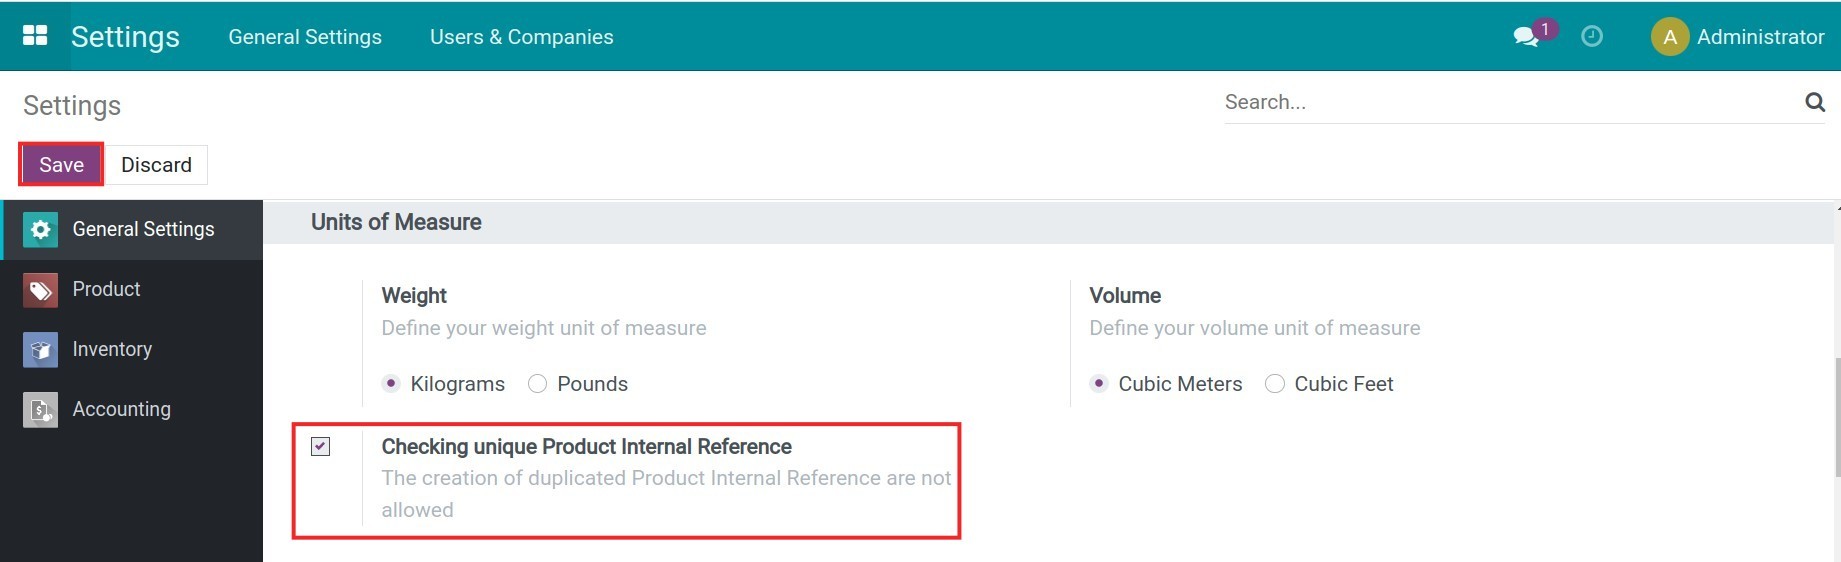 Enable checking unique Product Internal Reference